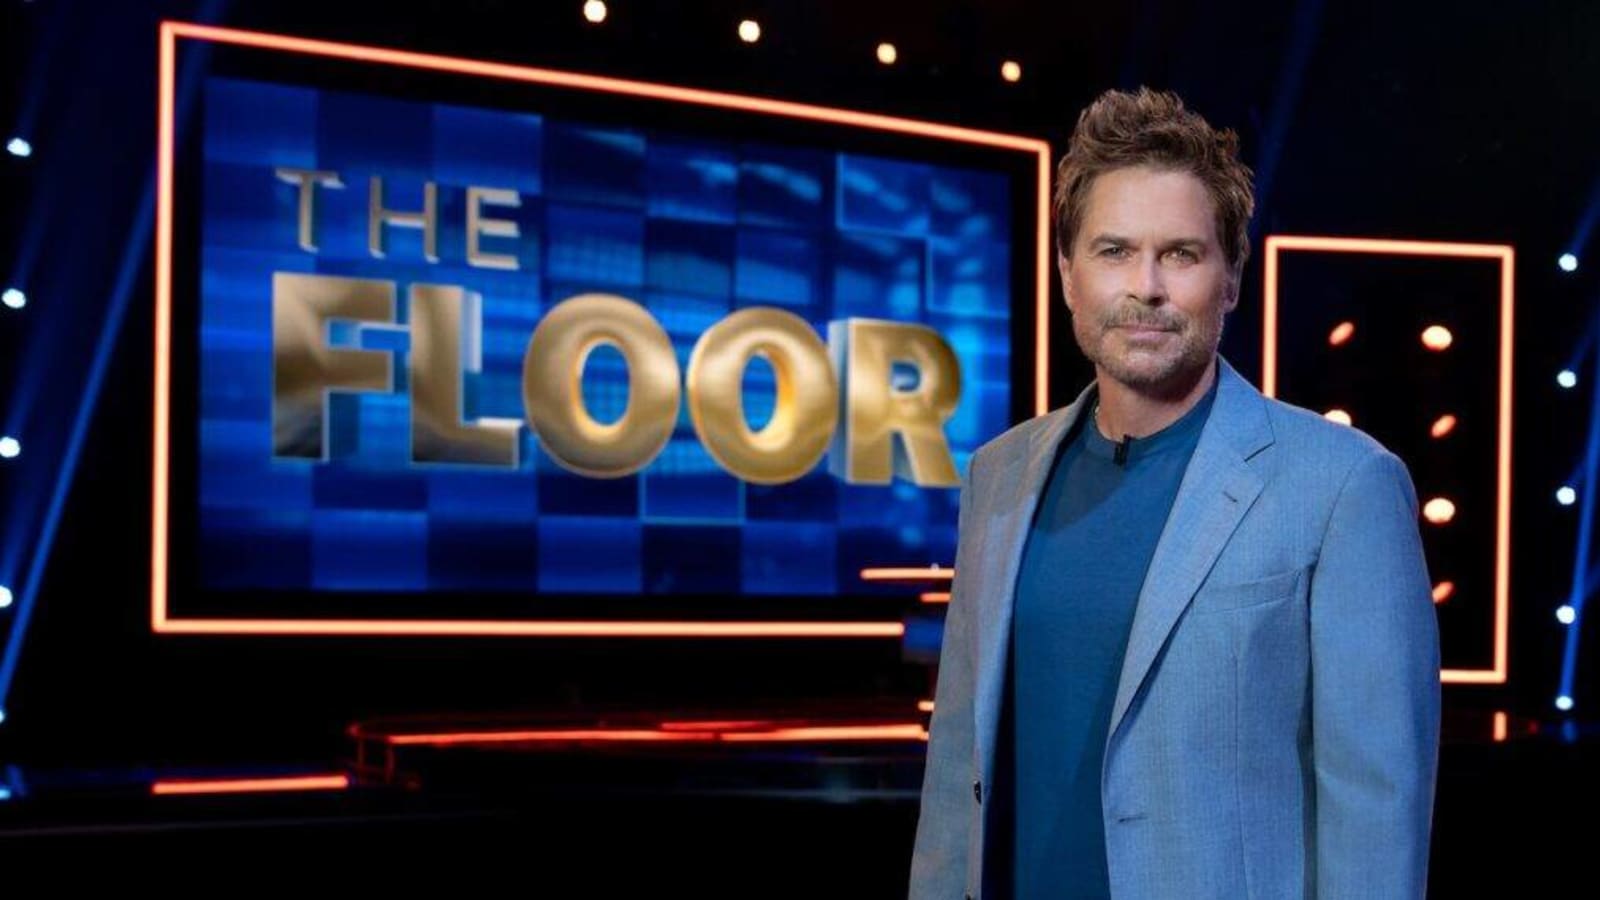 ‘The Floor’: Fox Game Show With Host Rob Lowe Sets Premiere Date (VIDEO)